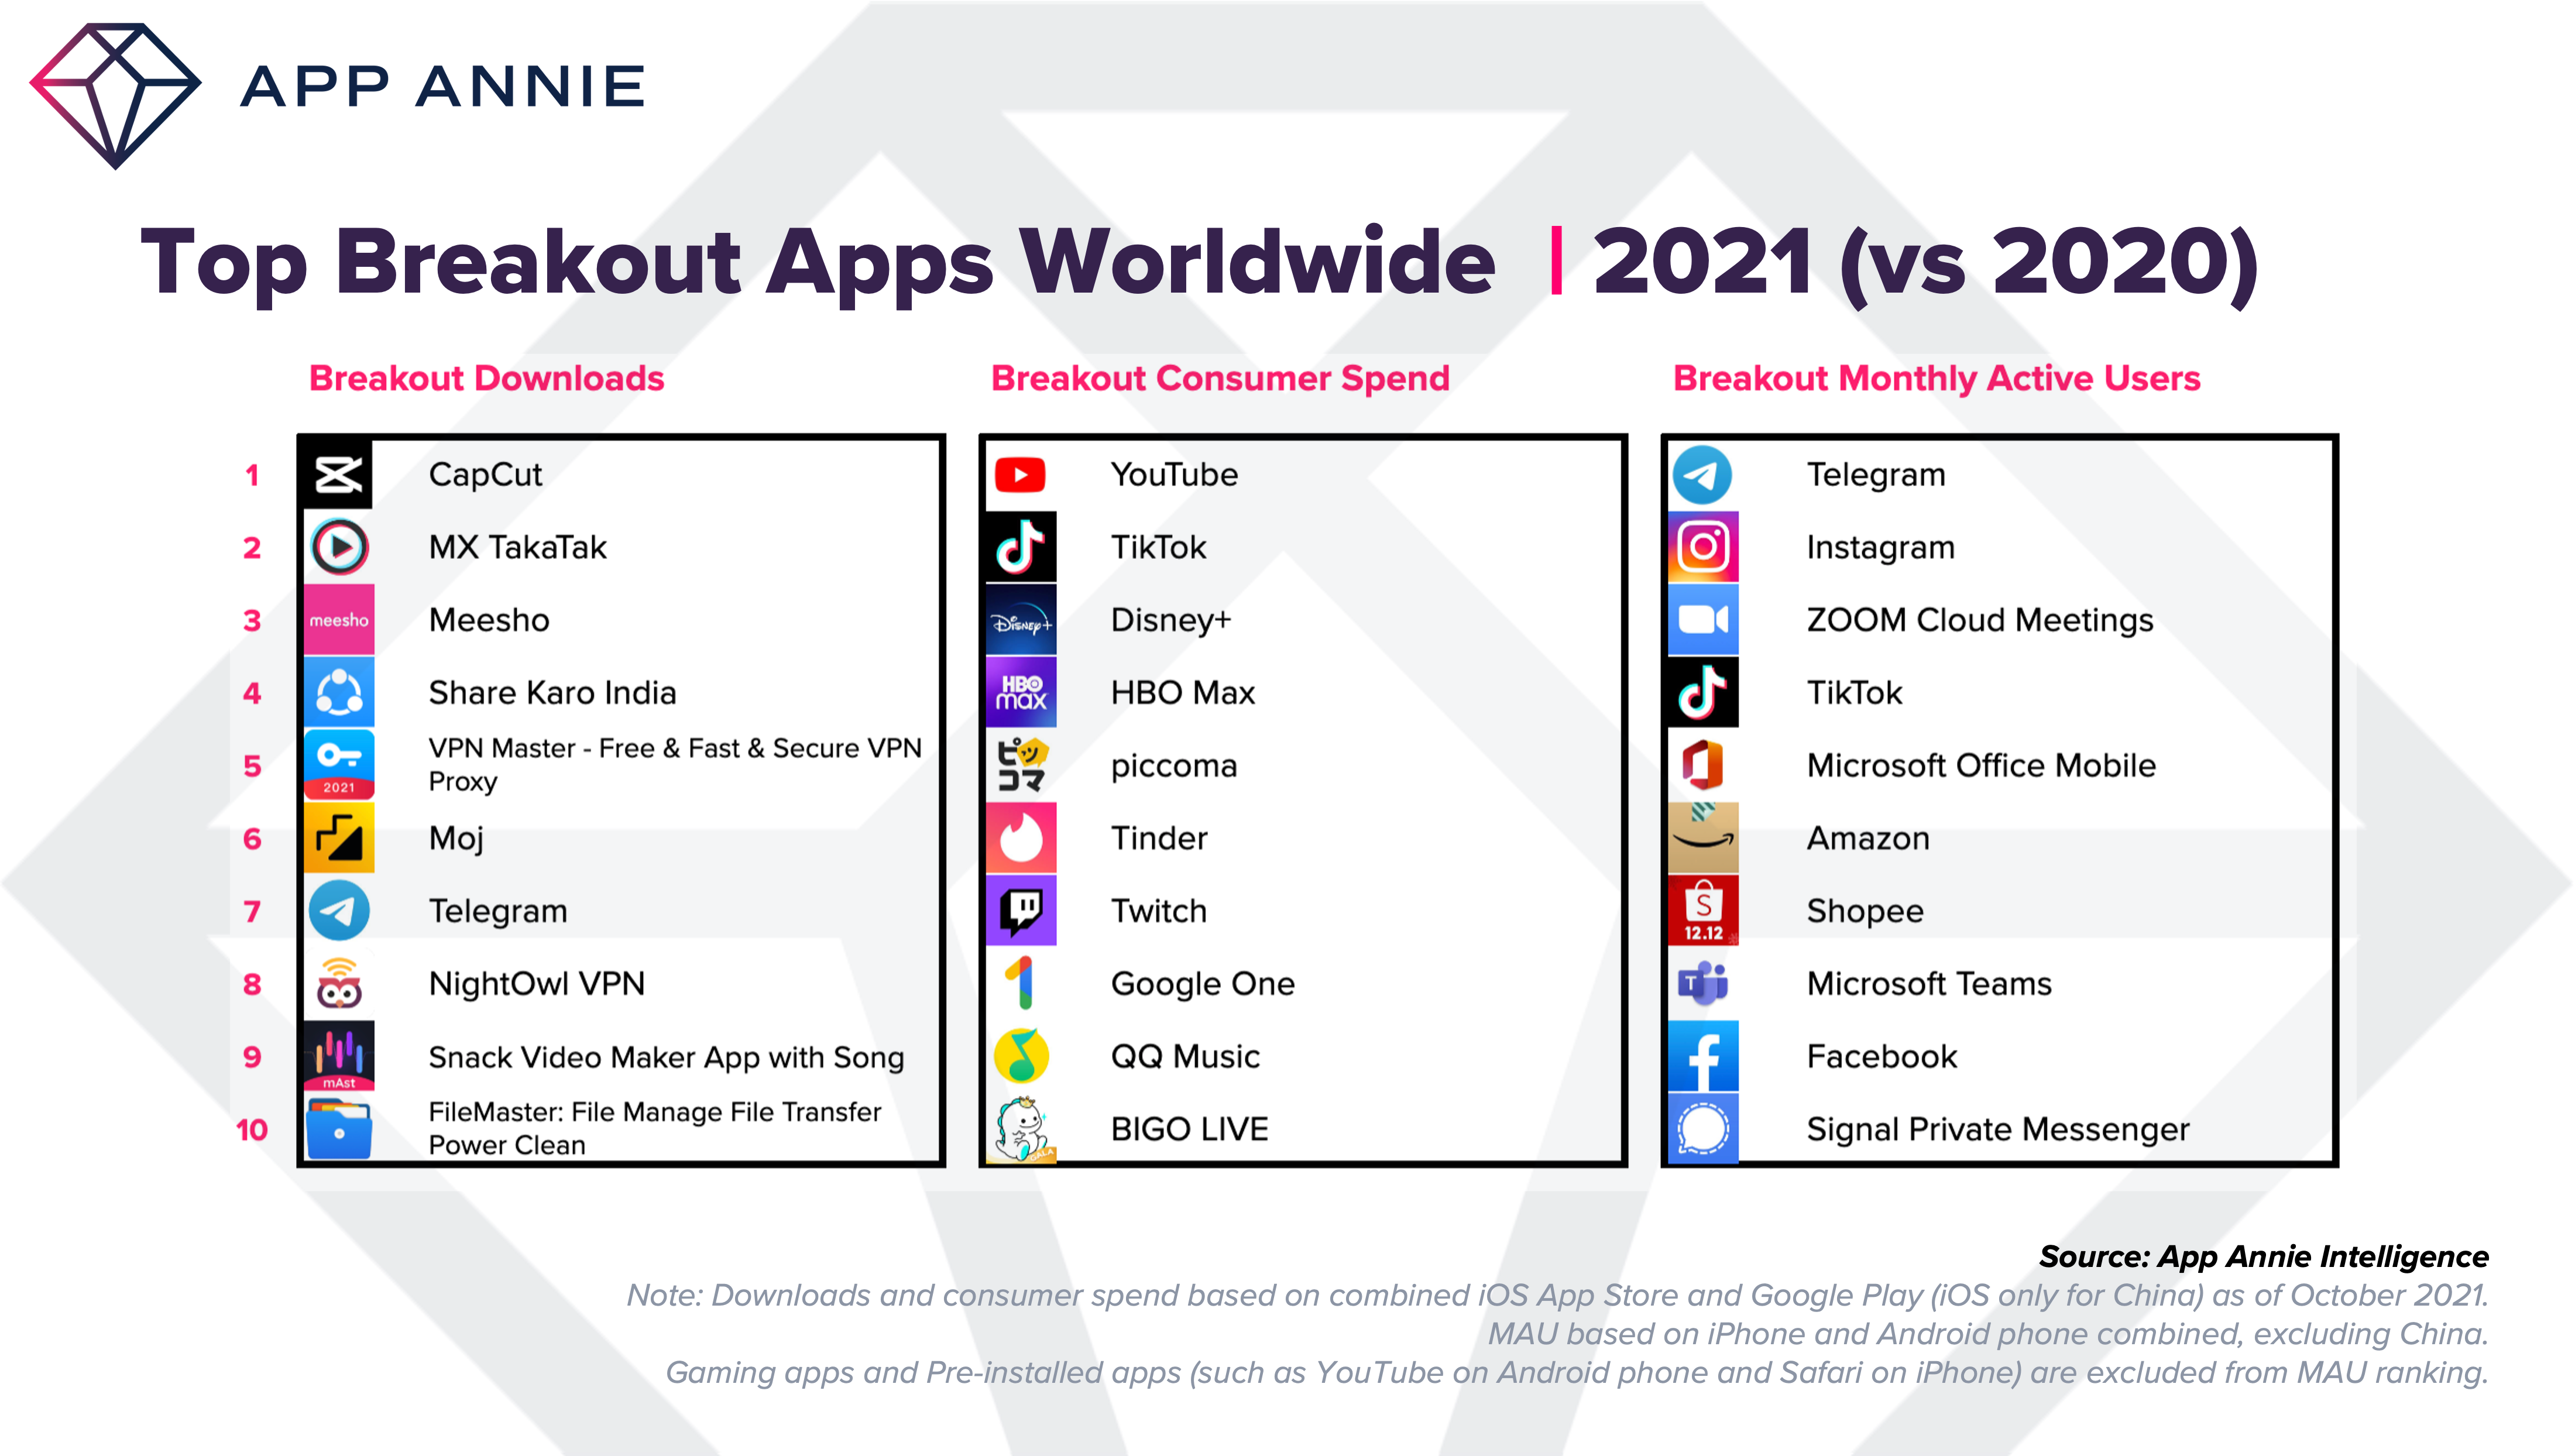 2021: The Year The World Will Spend 5B In Apps & Mobile Games